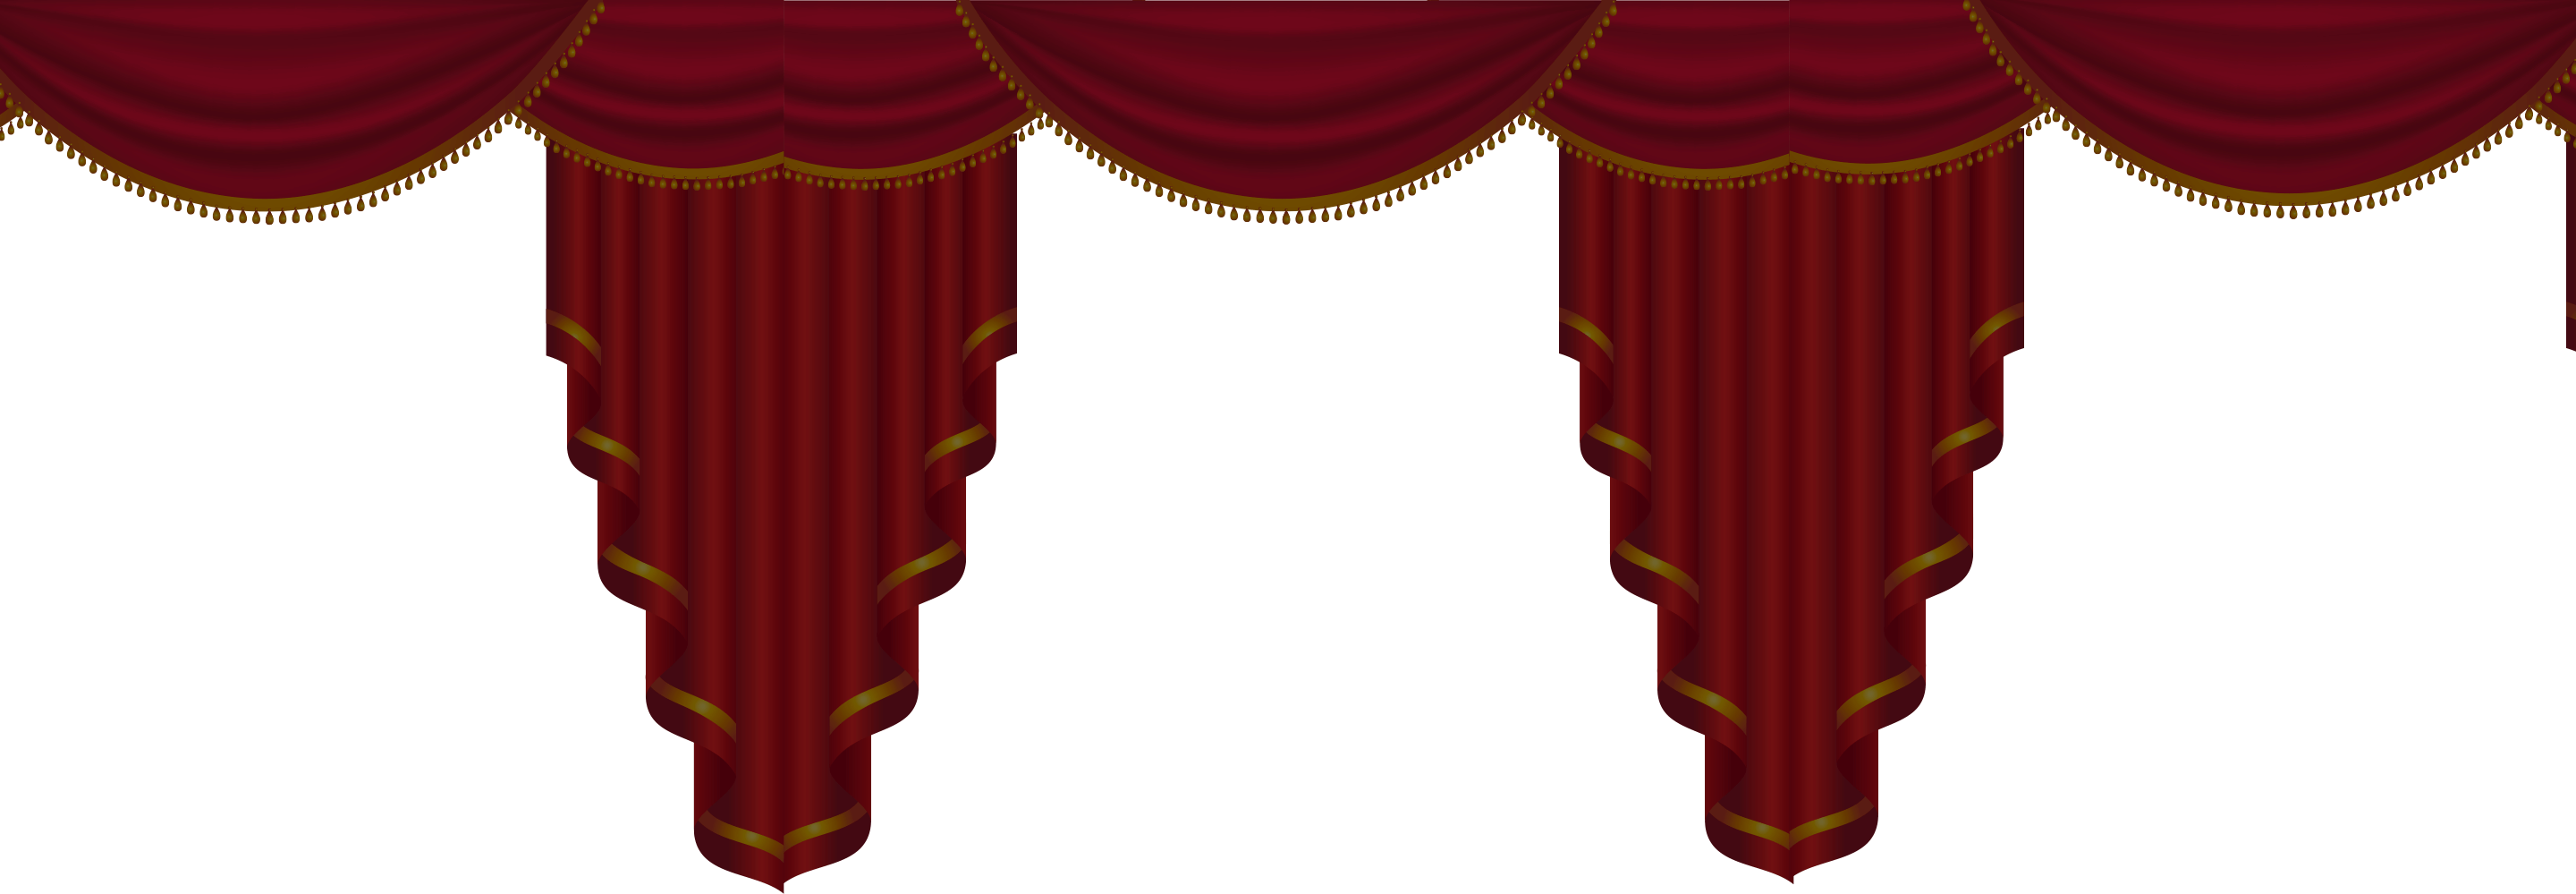 Theater Curtain PNG Transparent Image